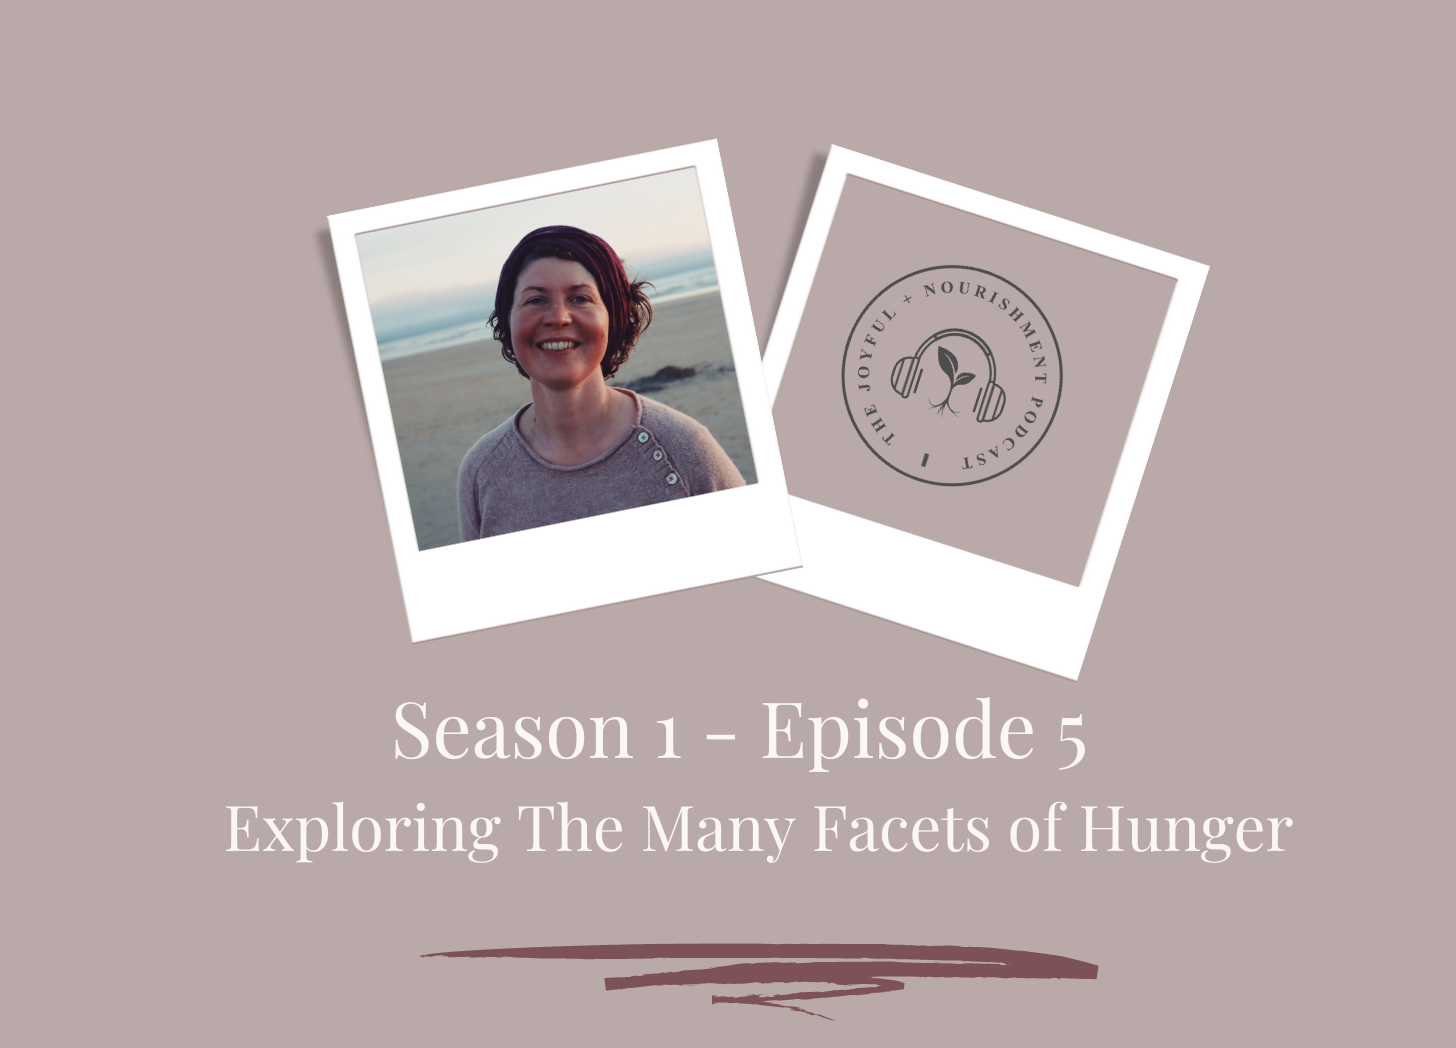 SE1-Ep5: The Many Facets of Hunger